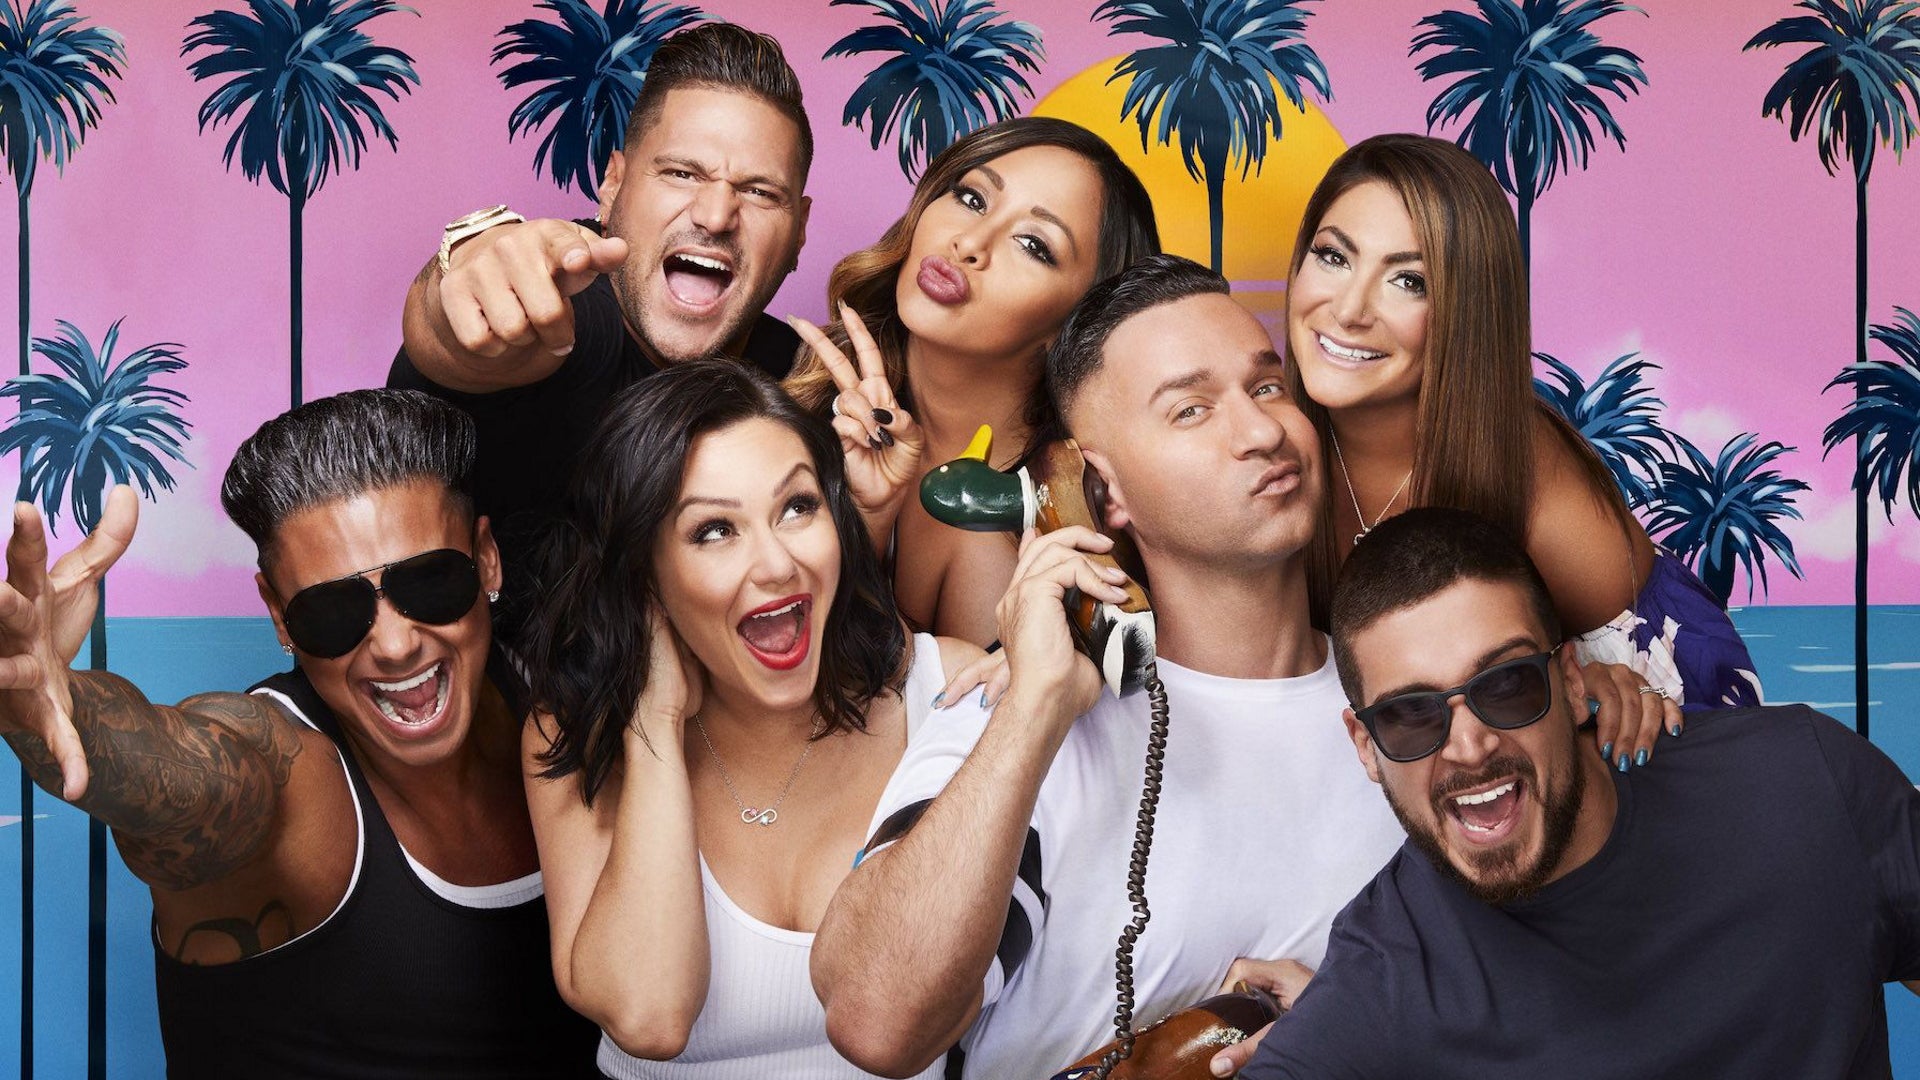 Jersey Shore: The Complete Series - Seasons 1-6